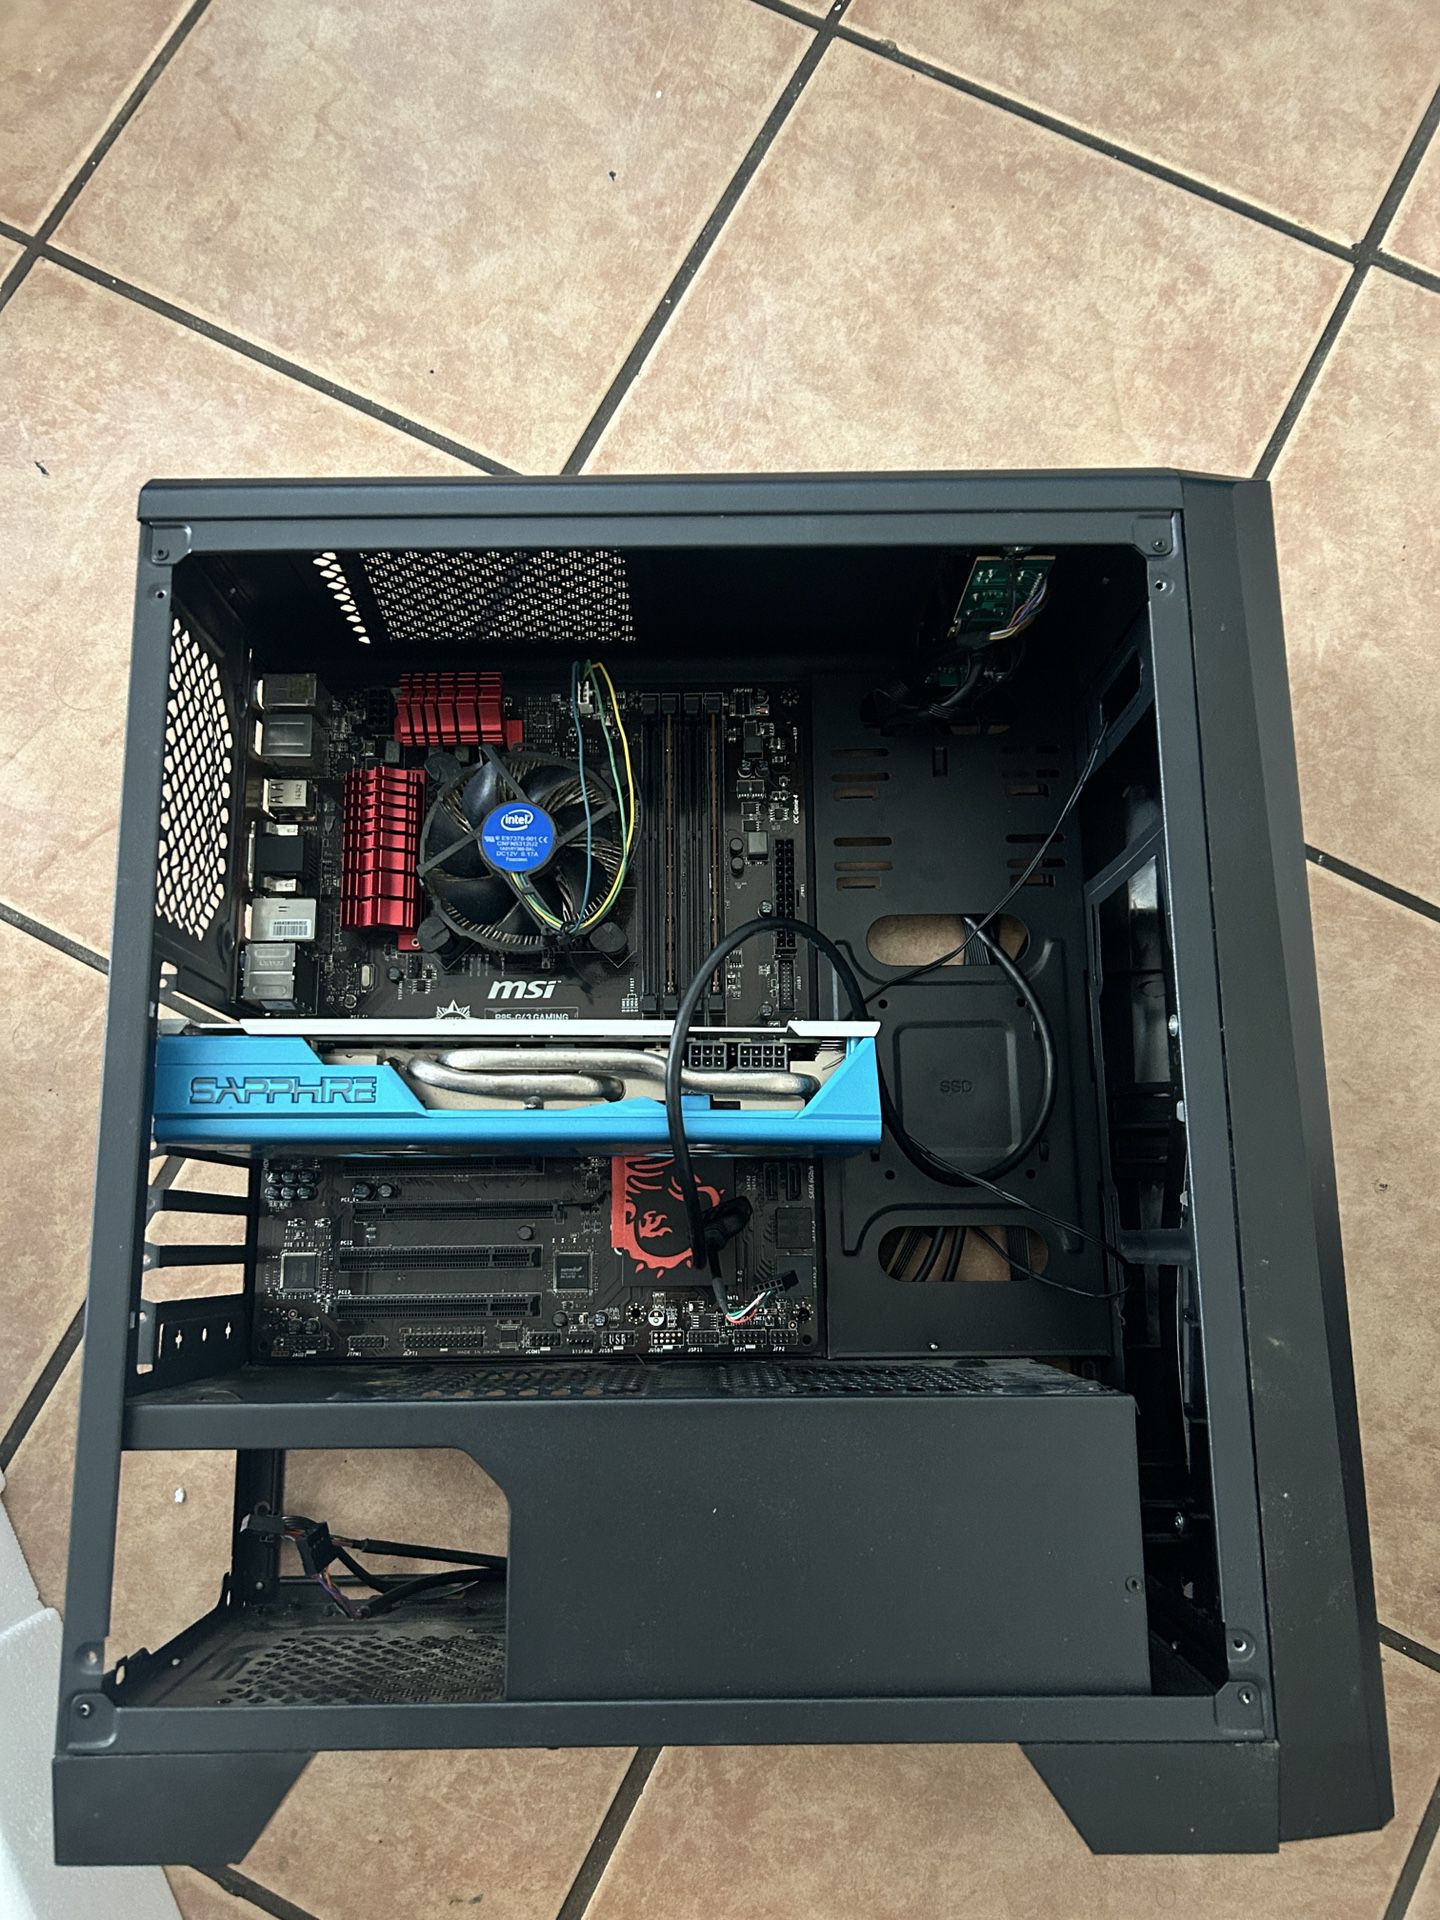 Gaming PC ( Just Needs Power Supply)